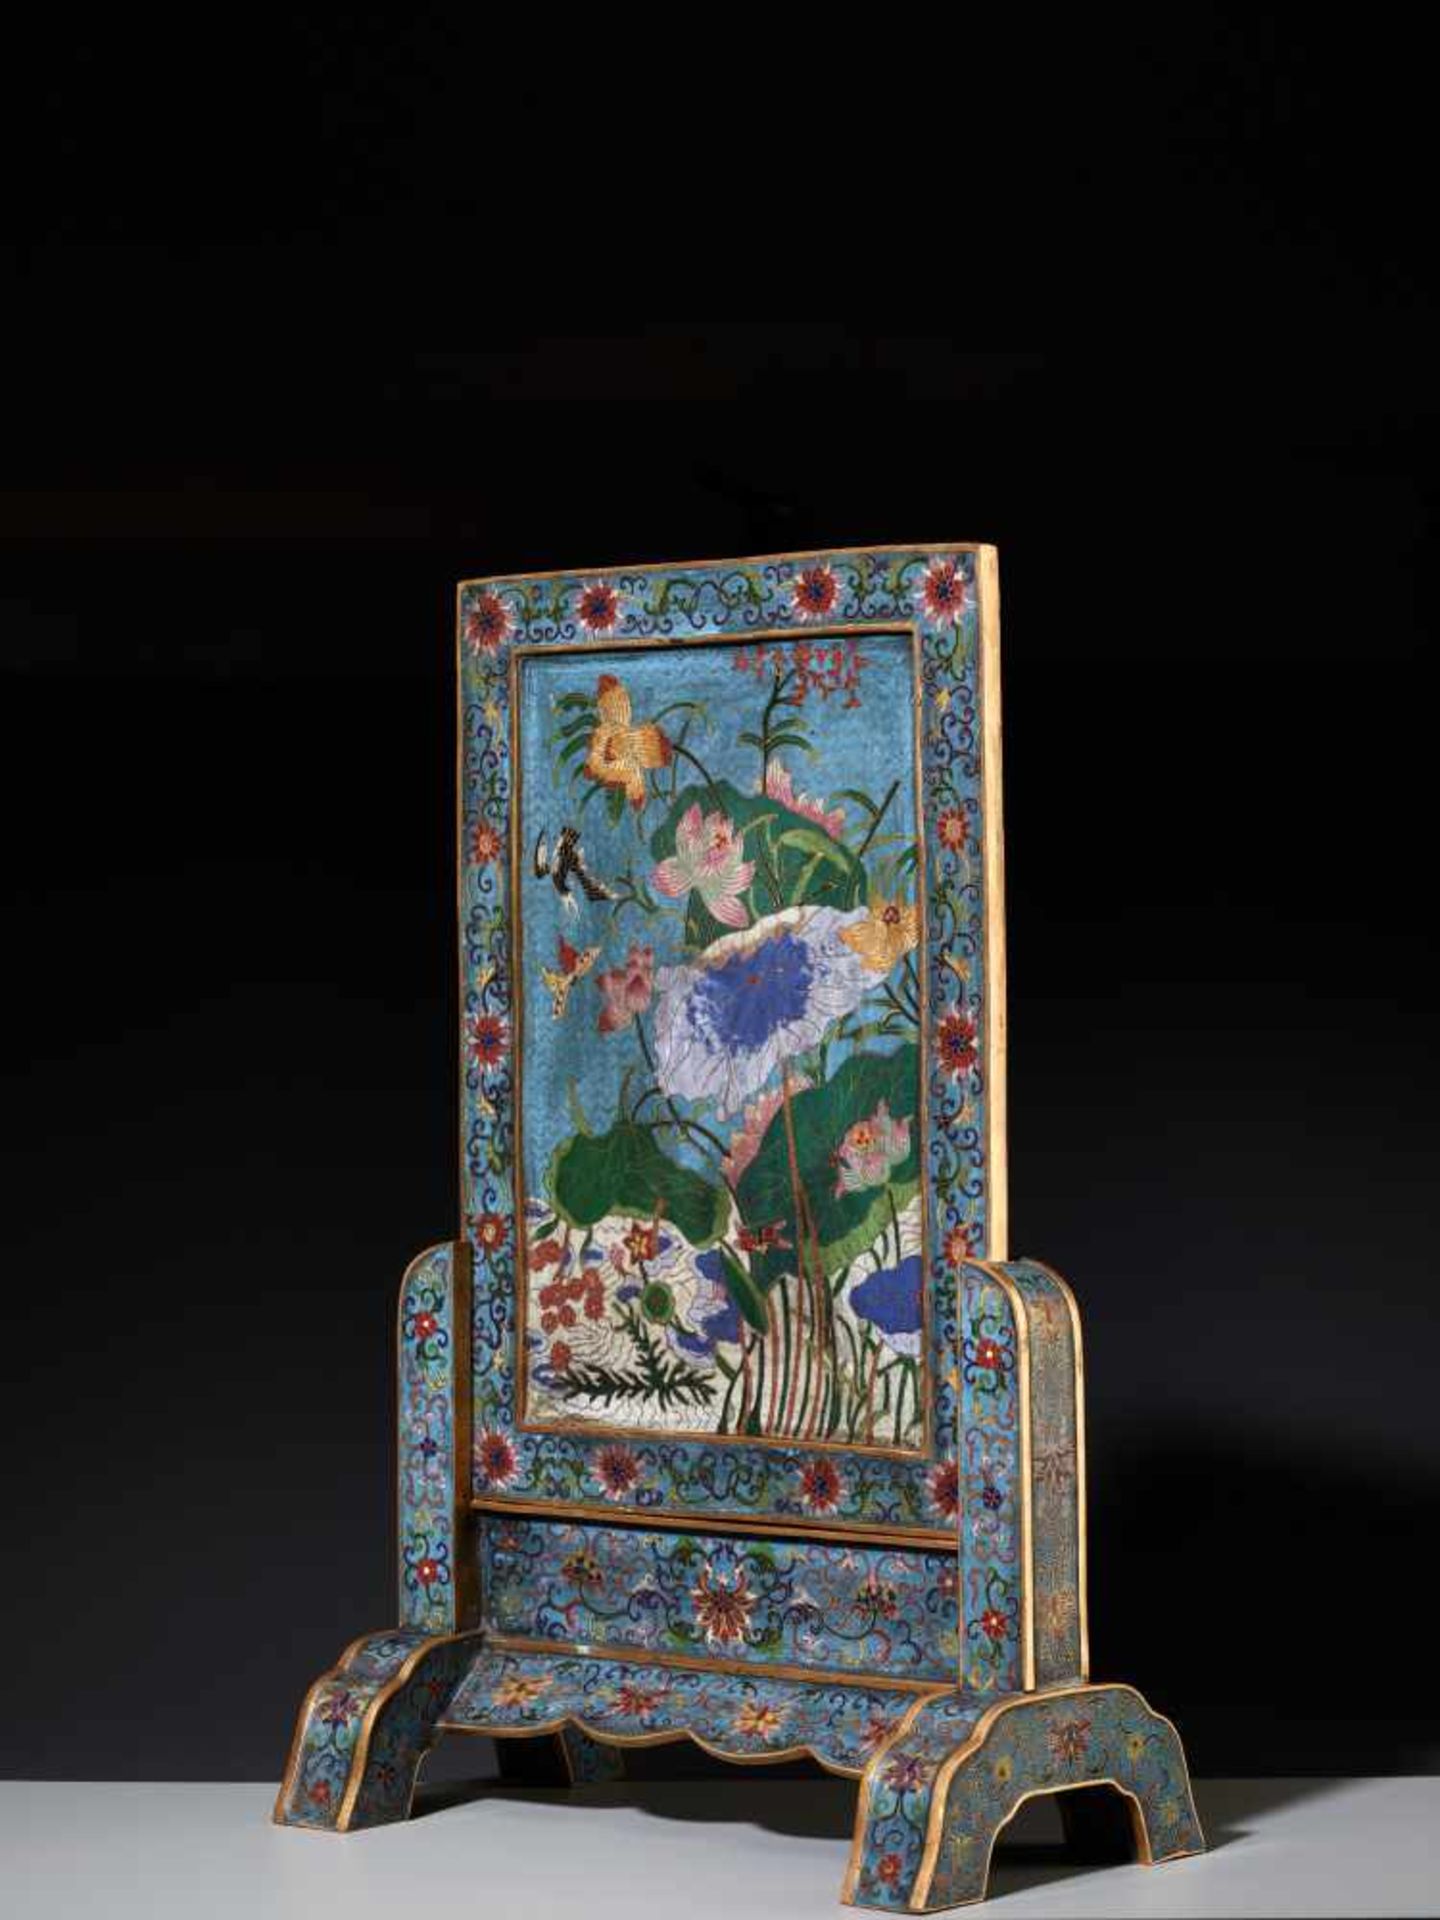 A CLOISONNE ‘LOTUS’ TABLE SCREEN AND STAND Cloisonné enamel on gilt bronze bodyChina, late Qing